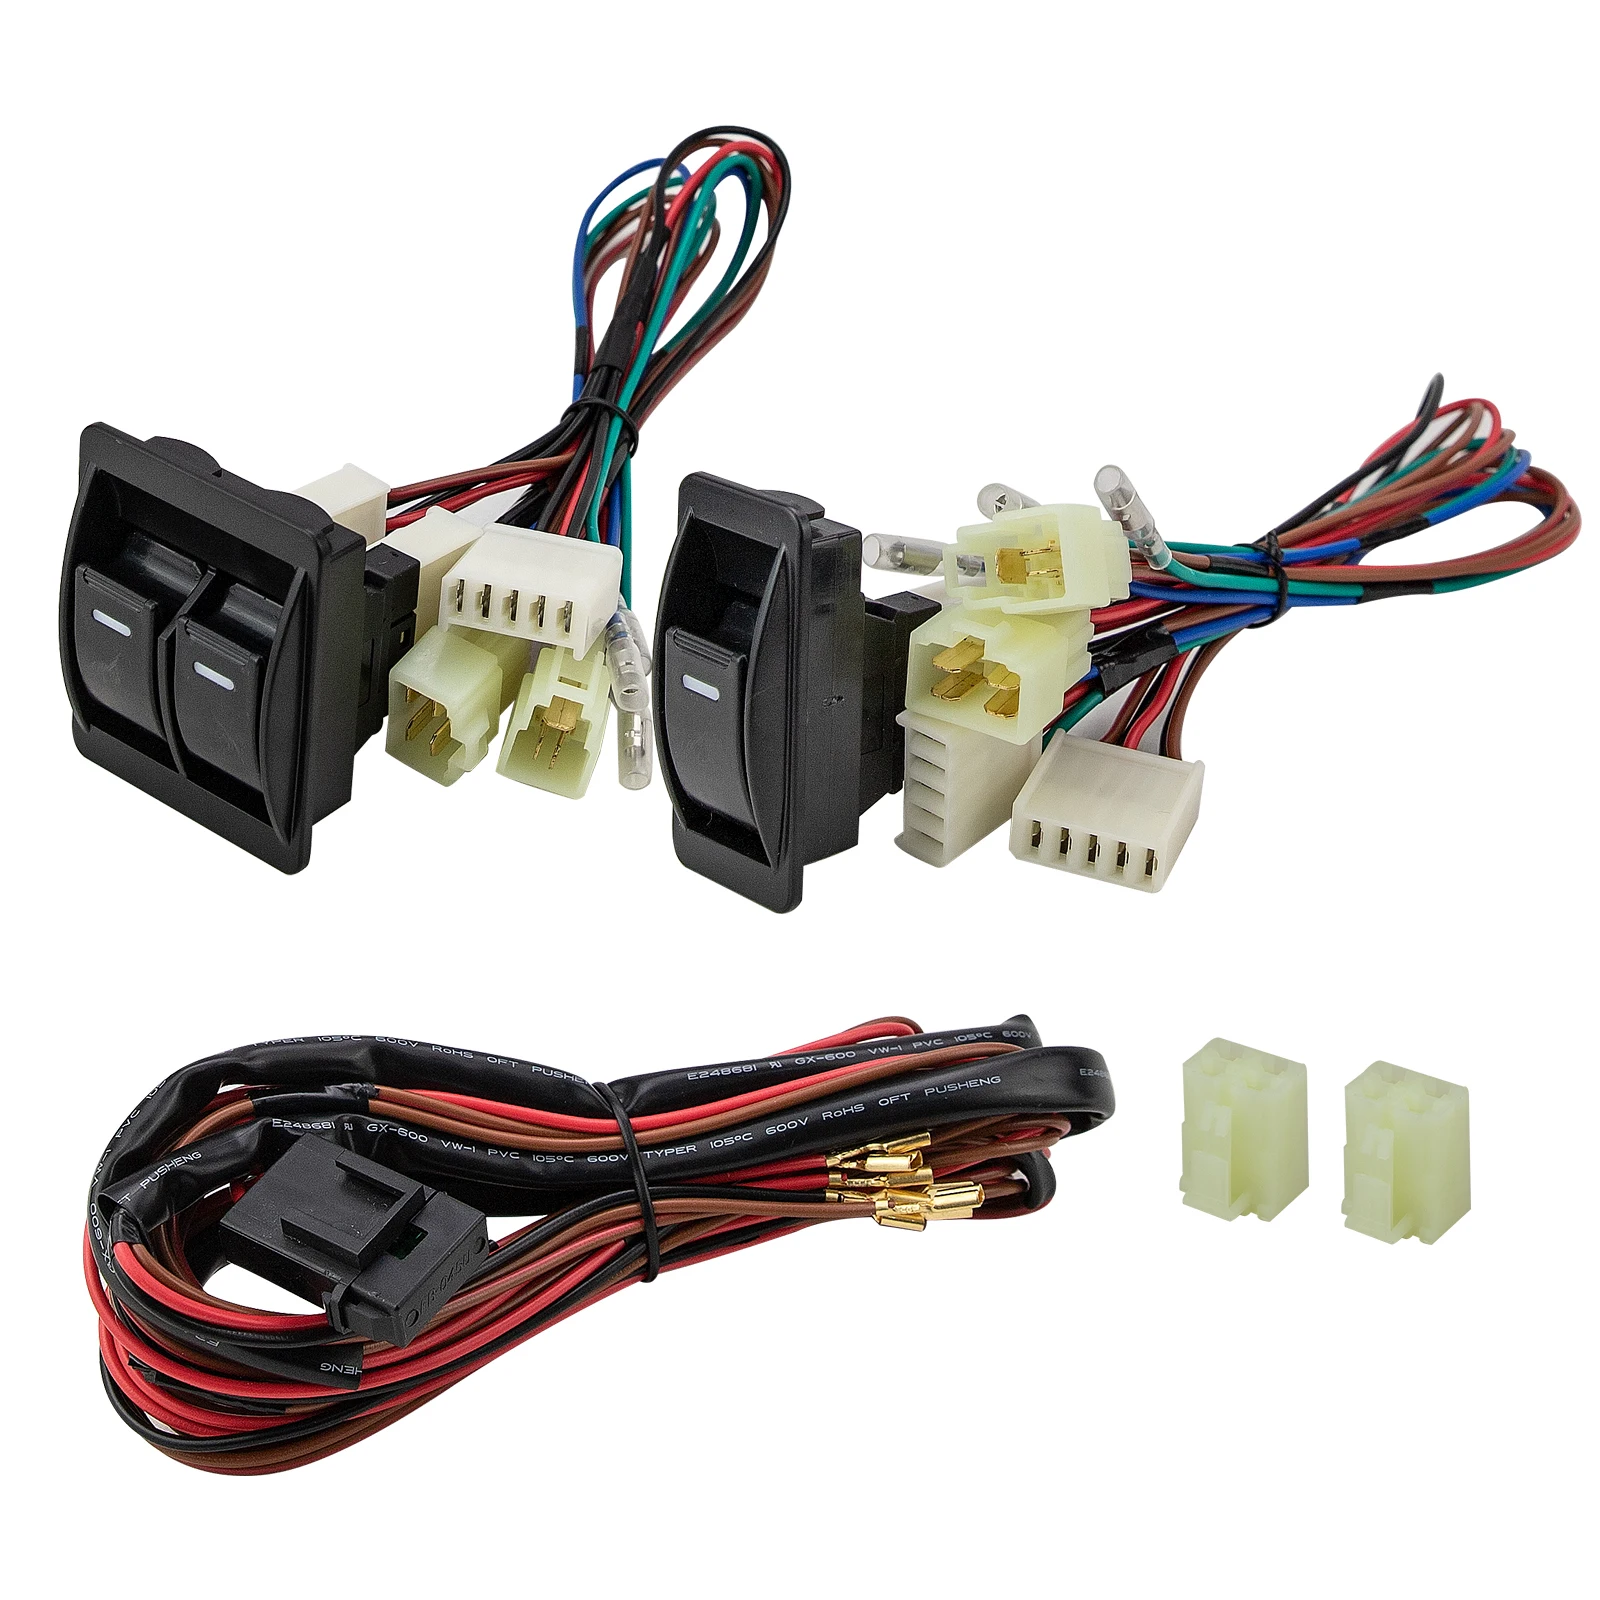 12V Universal Car Power Window Switch Regulator Kits with Wiring Harness For 2 Doors